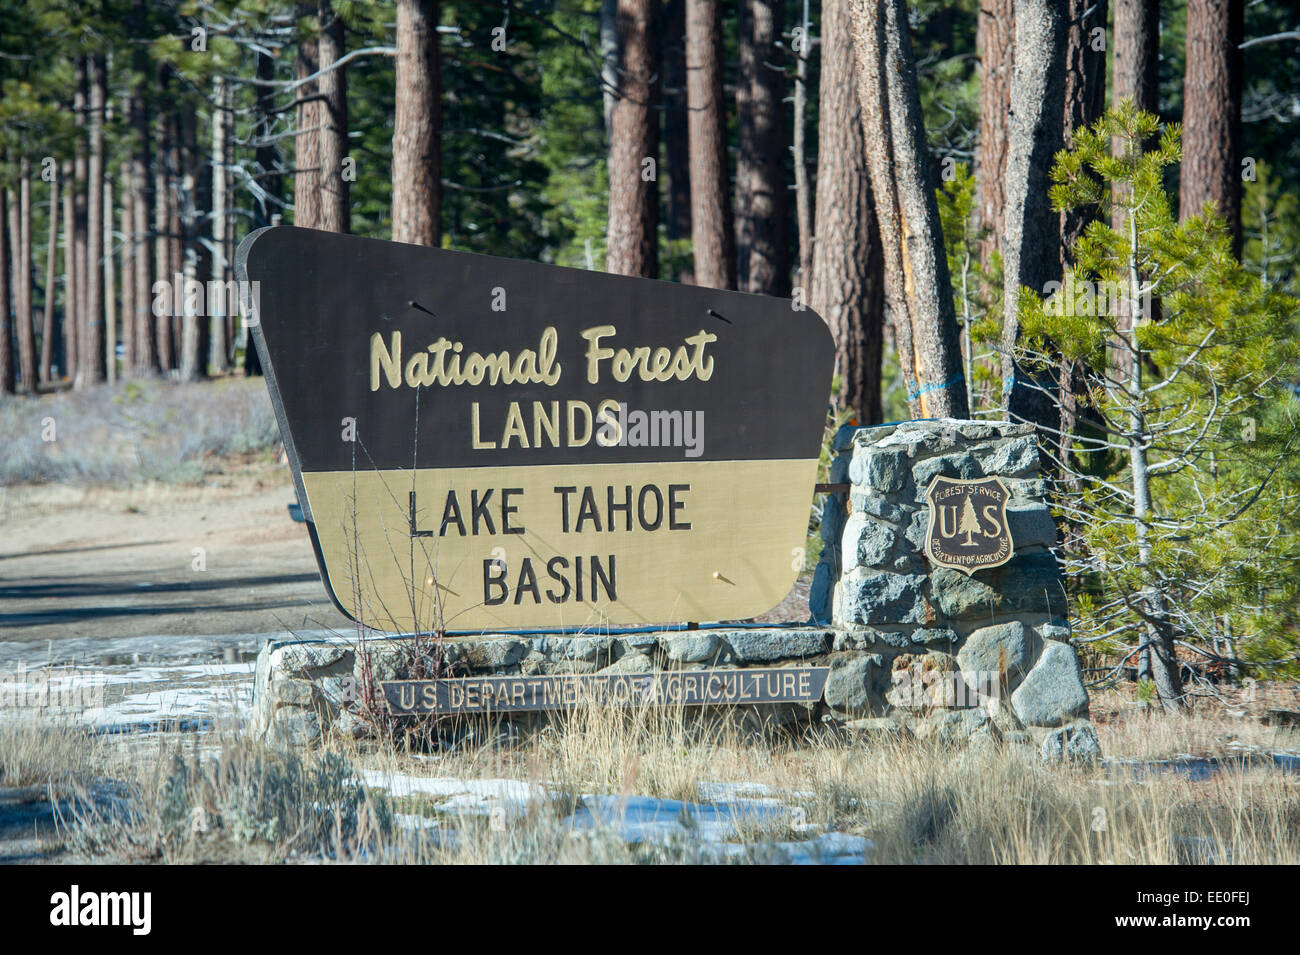 USA California CA Lake Tahoe Basin National Forest Lands U. S. Department of Agriculture sign Stock Photo